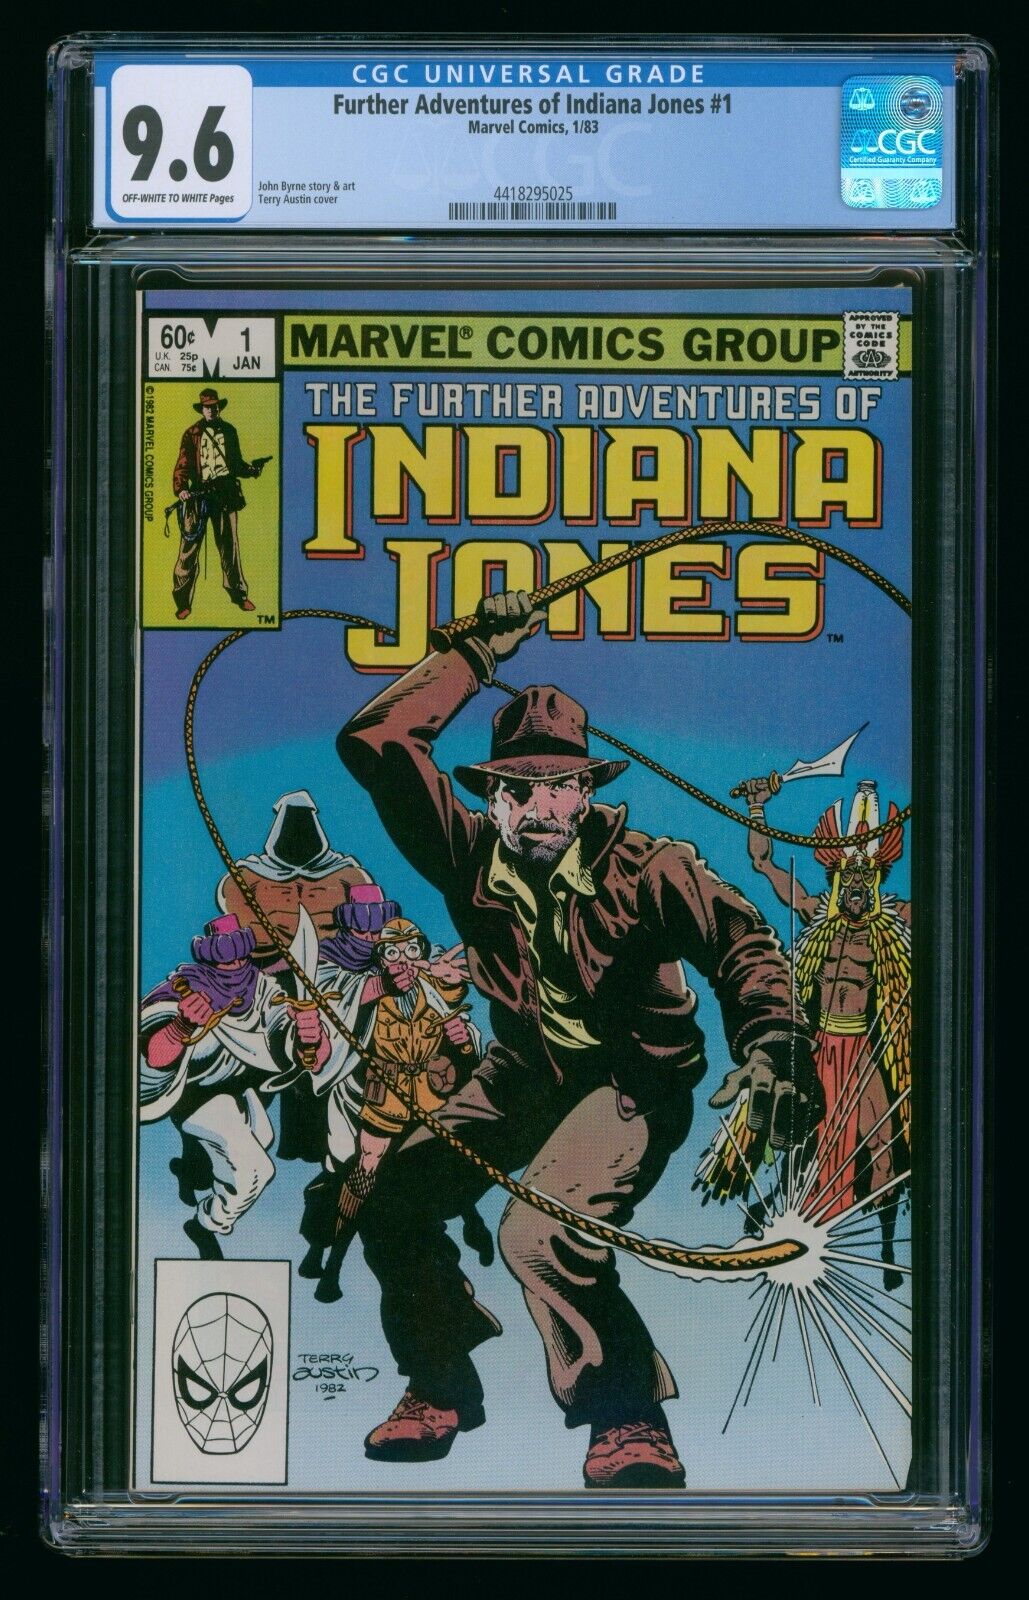 FURTHER ADVENTURES OF INDIANA JONES #1 (1983) CGC 9.6 WHITE PAGES